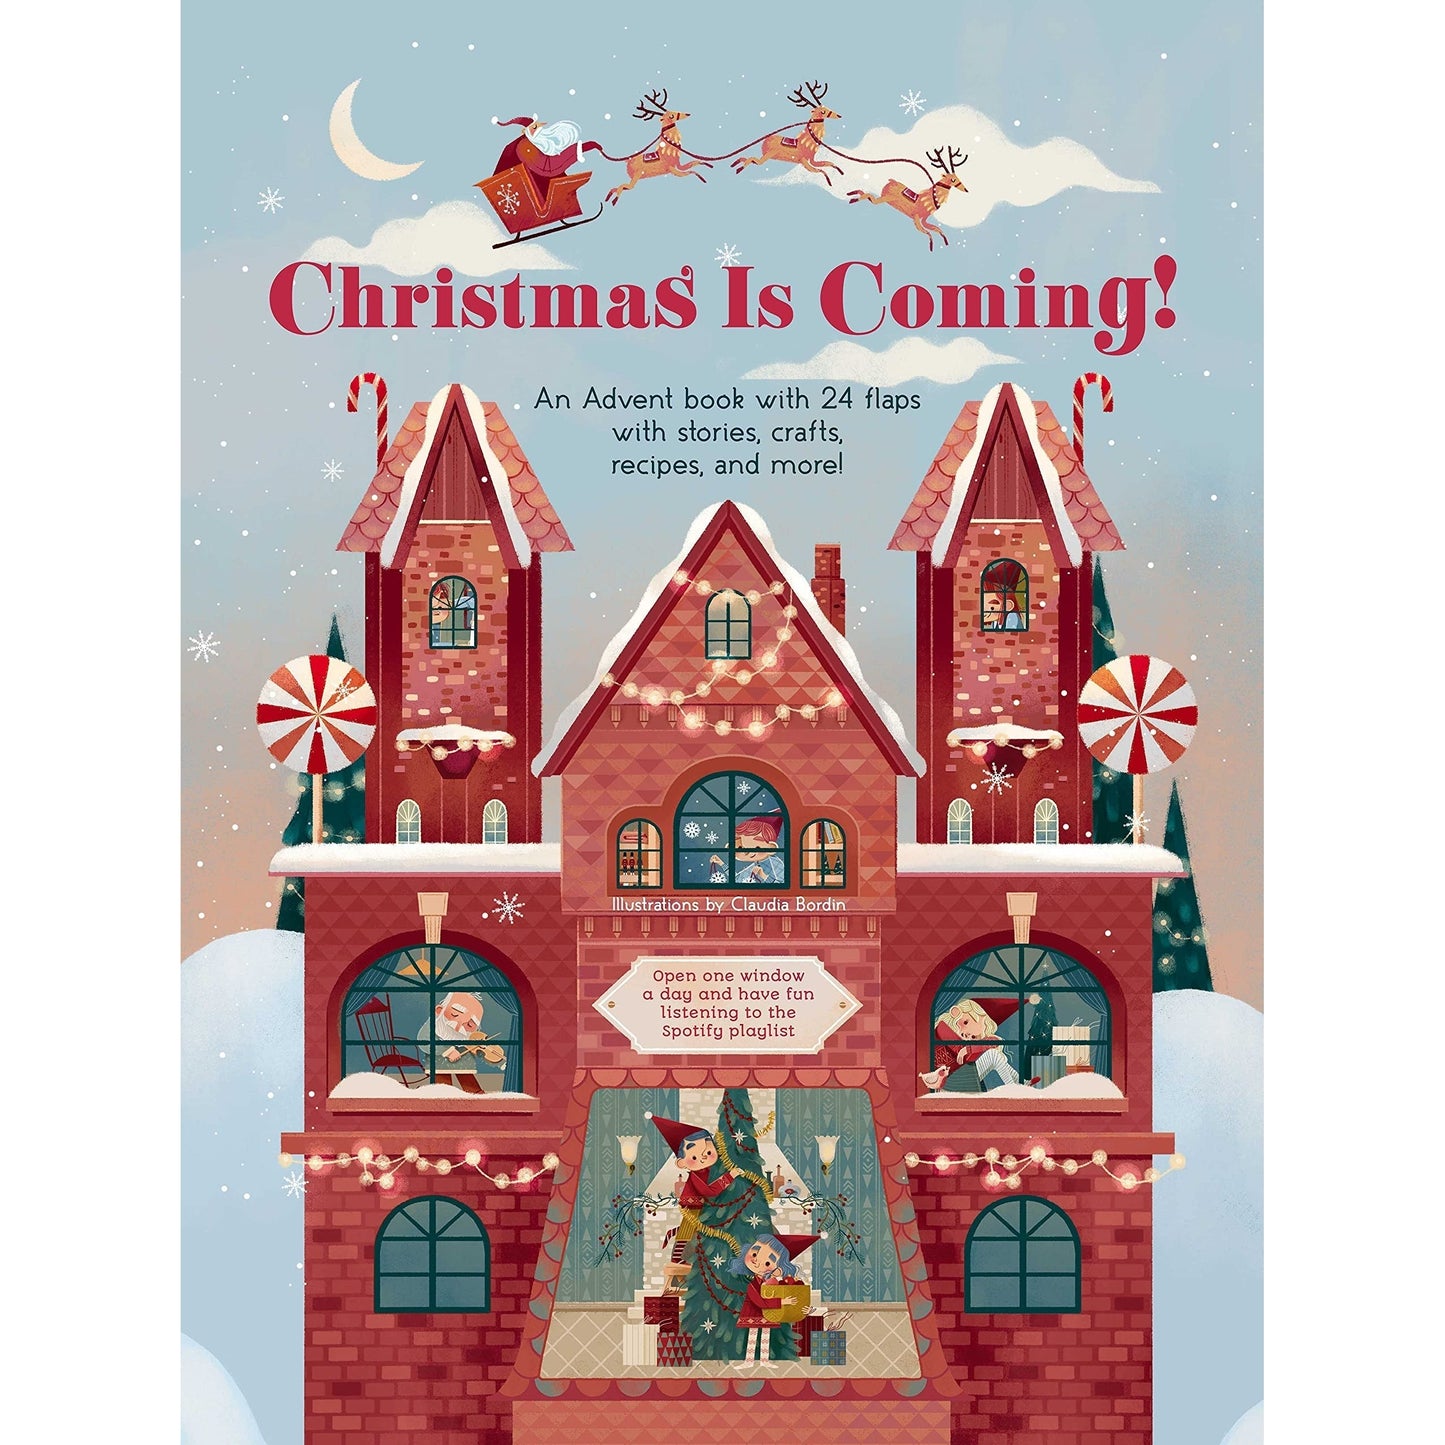 Christmas is Coming!: An Advent Book with 24 Flaps for Stories - Crafts - Recipes and More! - Claudia Bordin